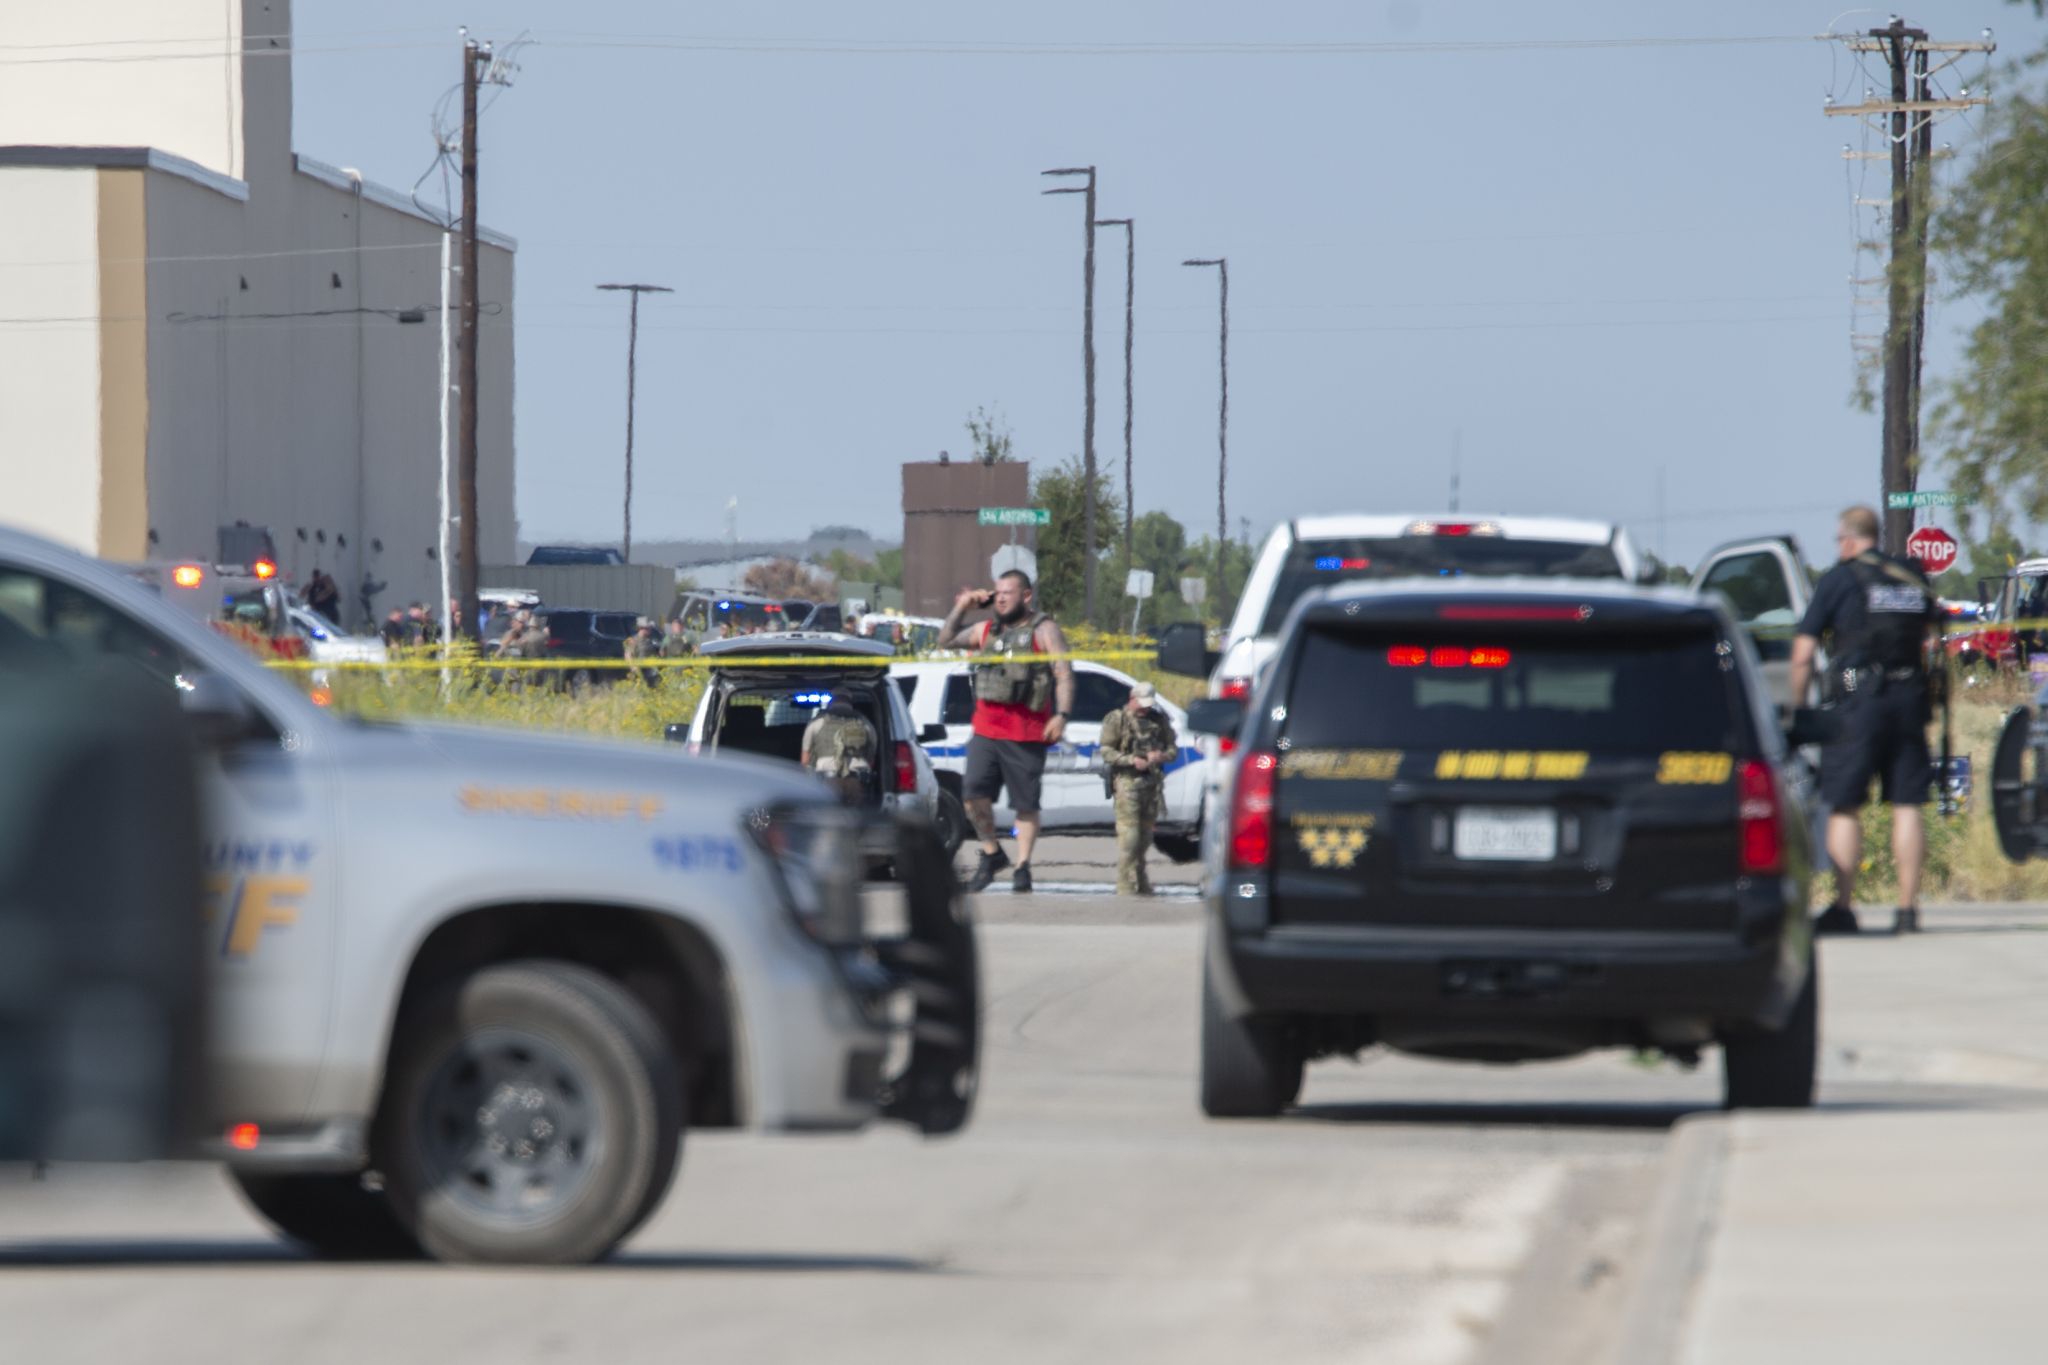 Odessa police chief: 1 suspect, 5 victims dead after shooting - Houston Chronicle2048 x 1365